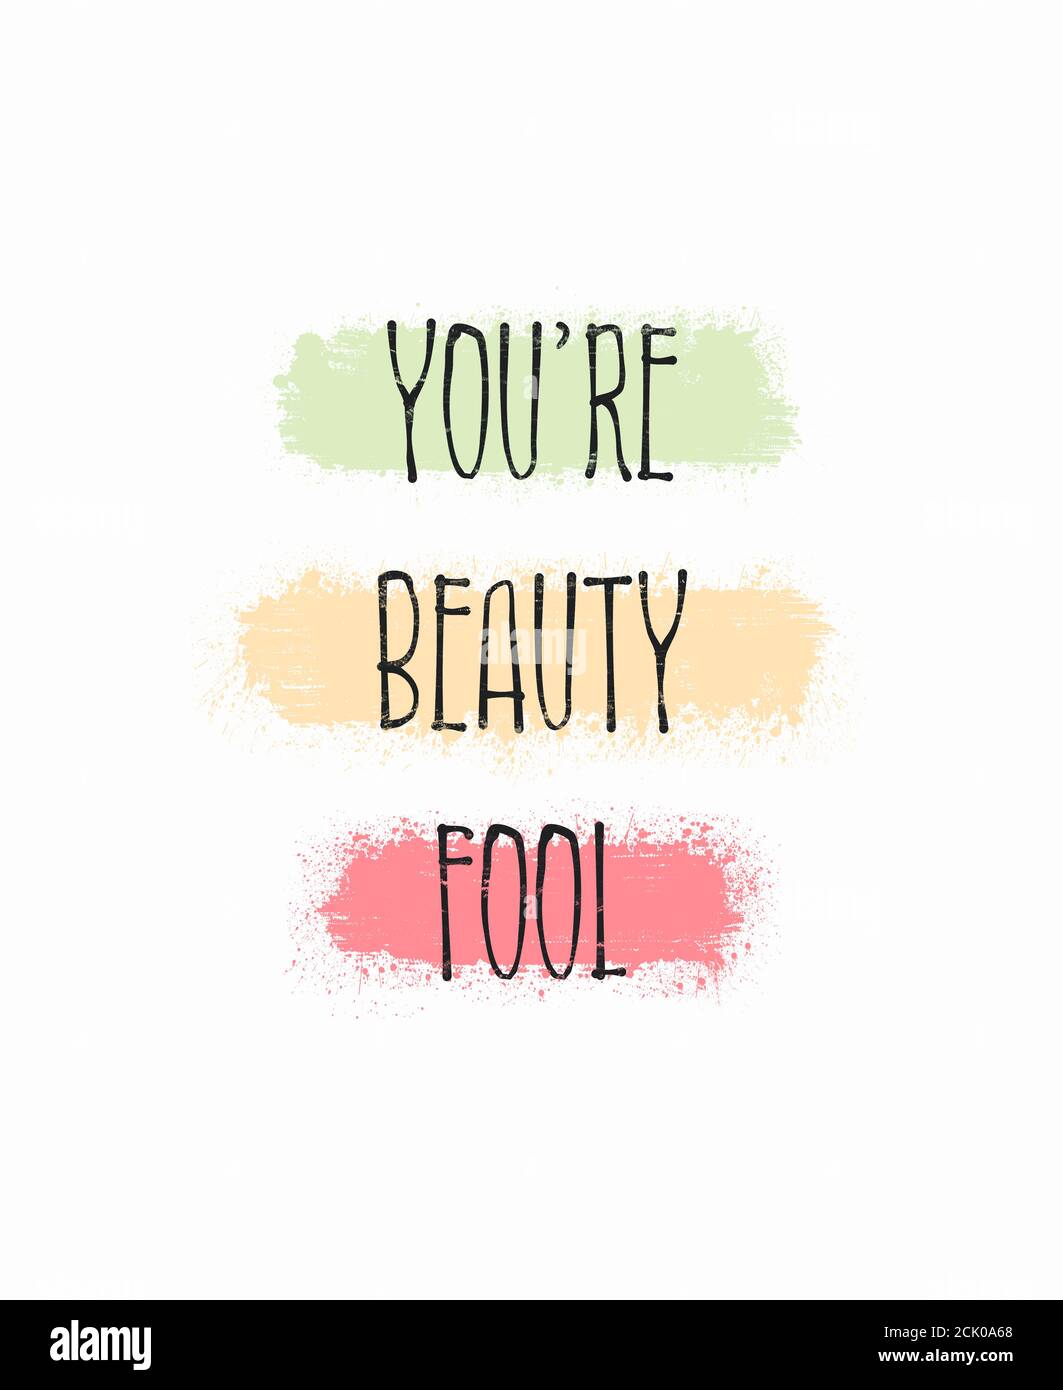 You're beauty fool, kinda beautiful. Funny and positive text art, colorful inspiring and motivational illustration. Modern hipster lettering design, c Stock Photo